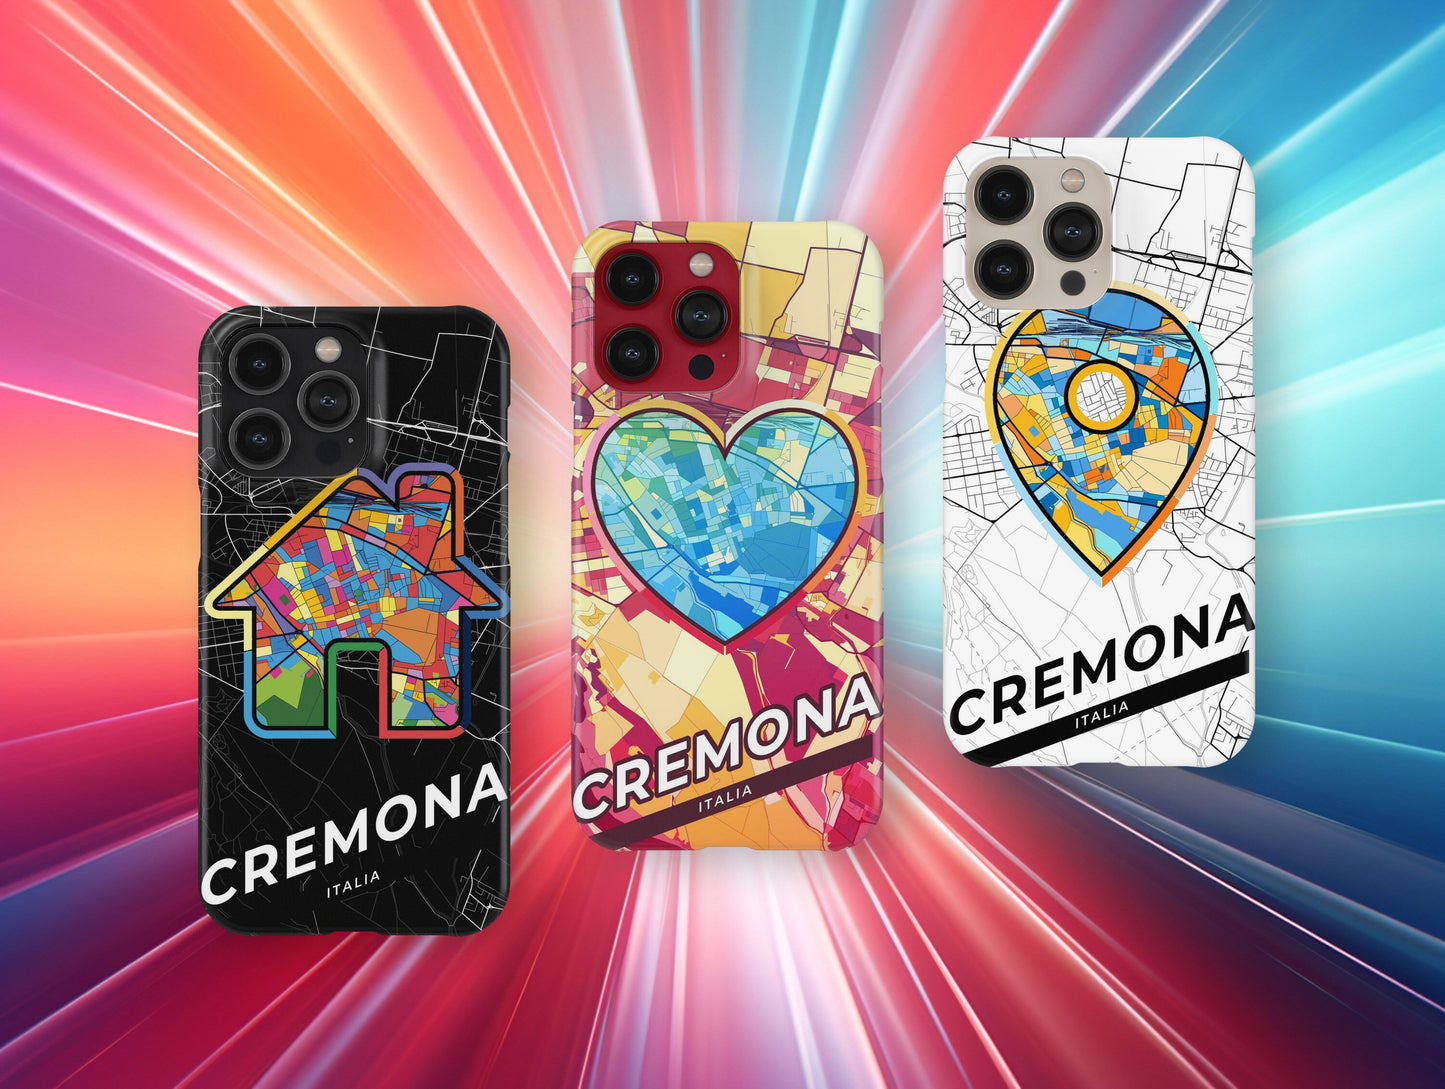 Cremona Italy slim phone case with colorful icon. Birthday, wedding or housewarming gift. Couple match cases.